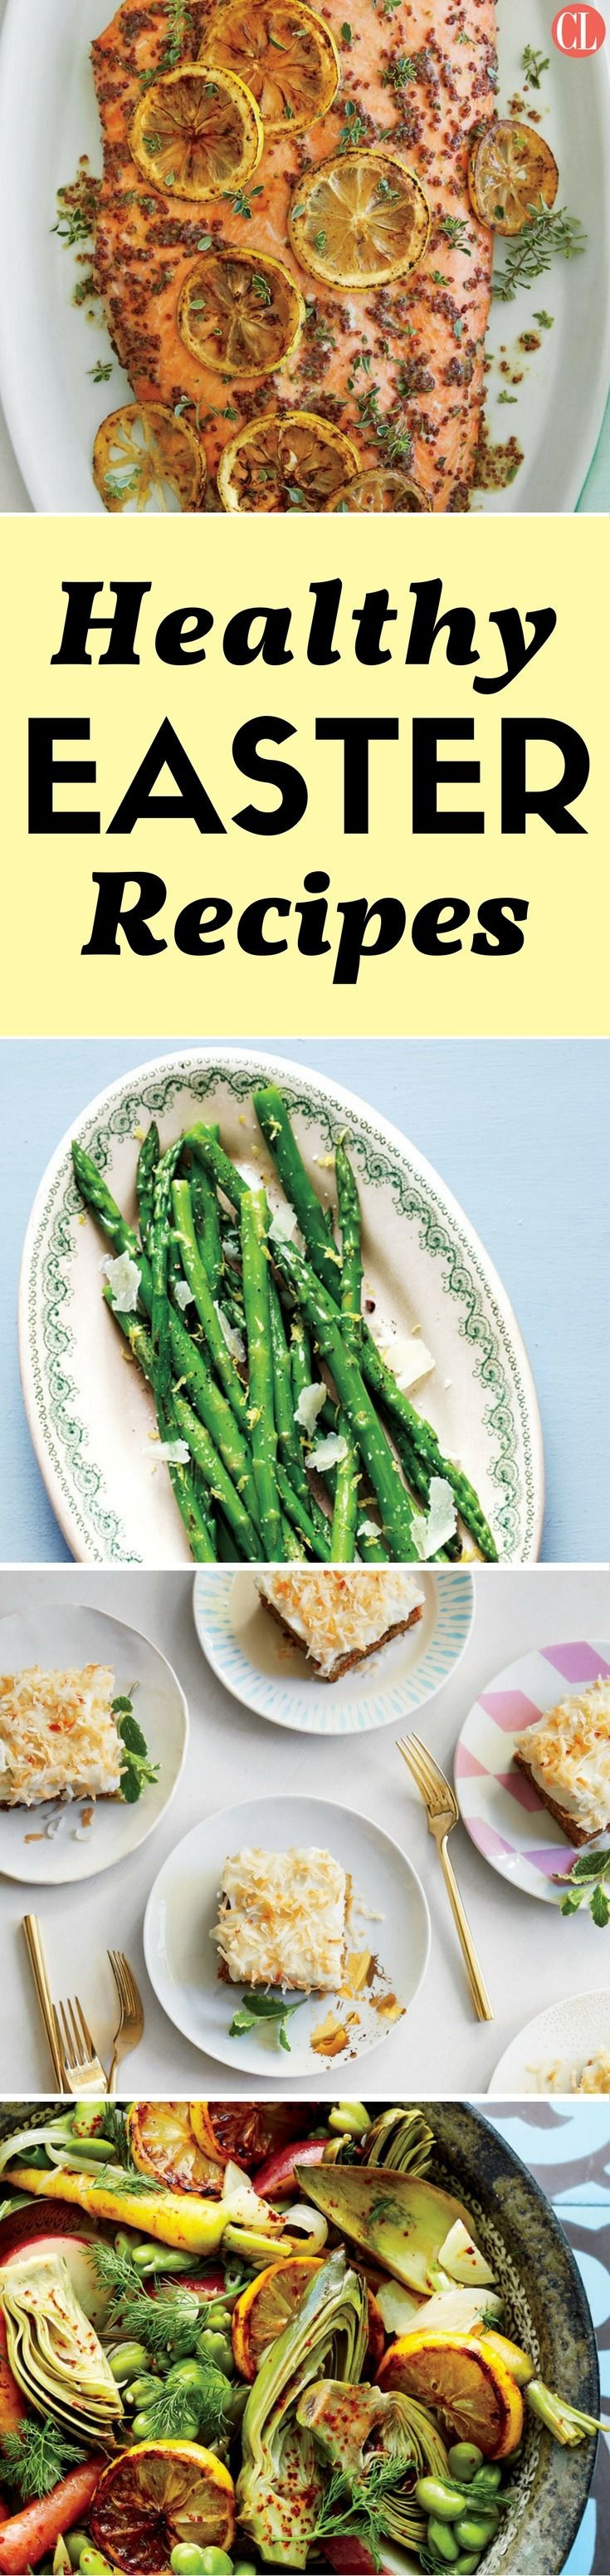 Healthy Easter Dinner Recipes
 262 best images about Easter Recipes on Pinterest